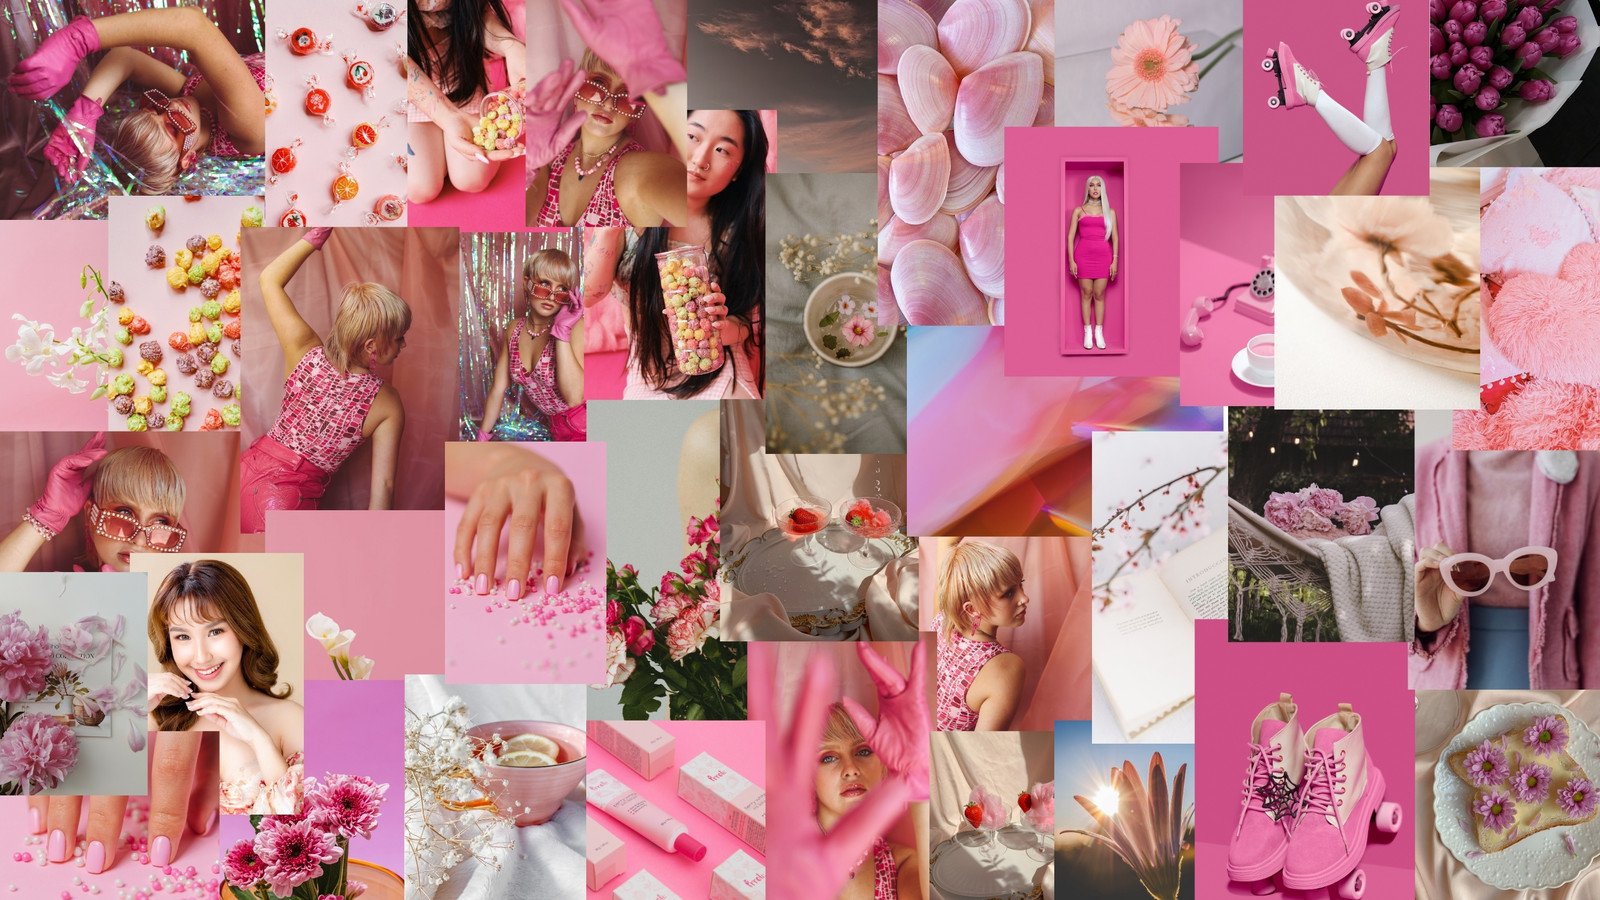 Customize 2,819+ Pink Aesthetic Wallpaper Templates Online - Canva